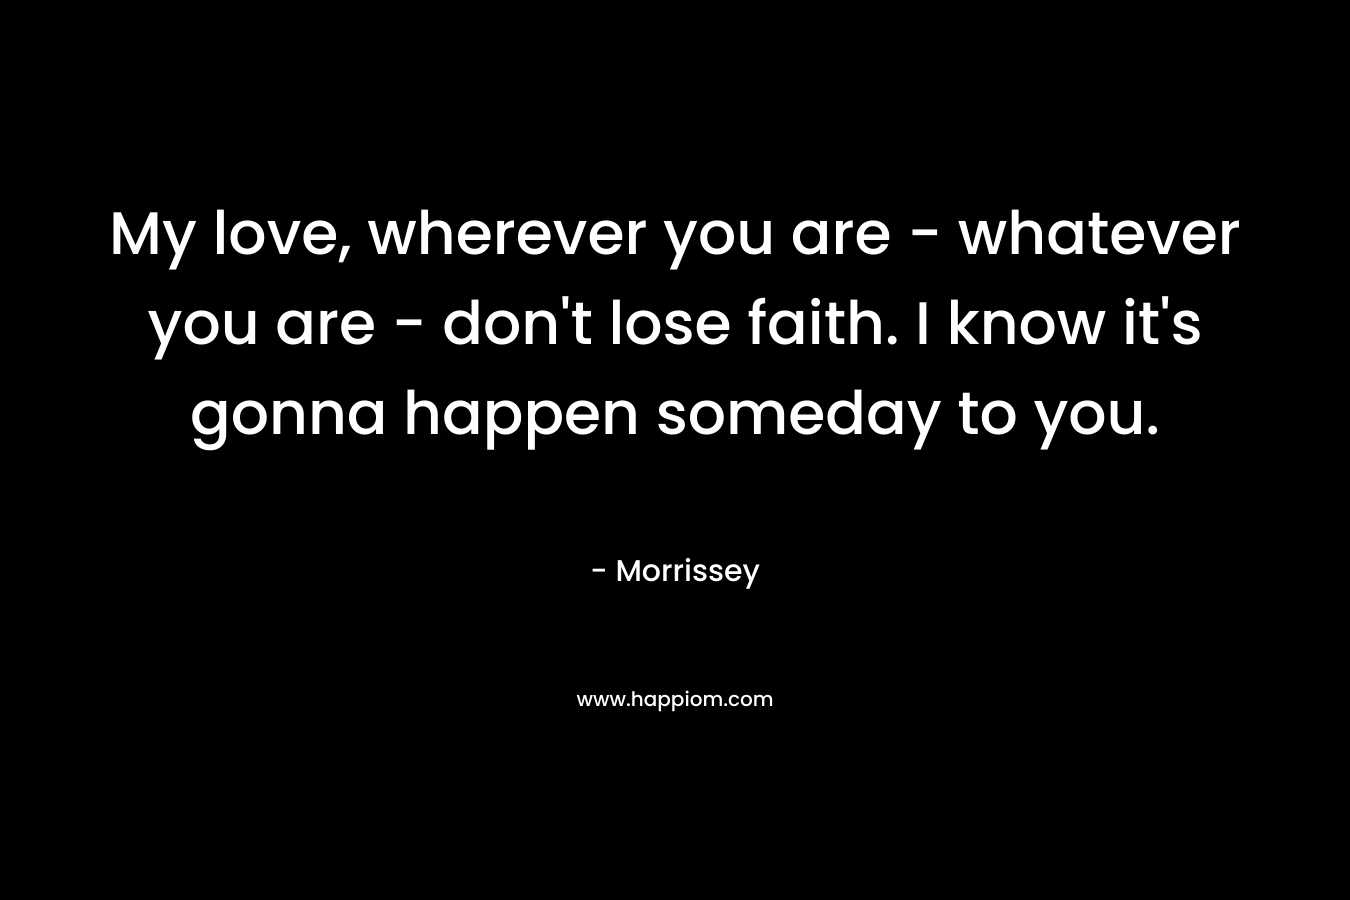 My love, wherever you are - whatever you are - don't lose faith. I know it's gonna happen someday to you.